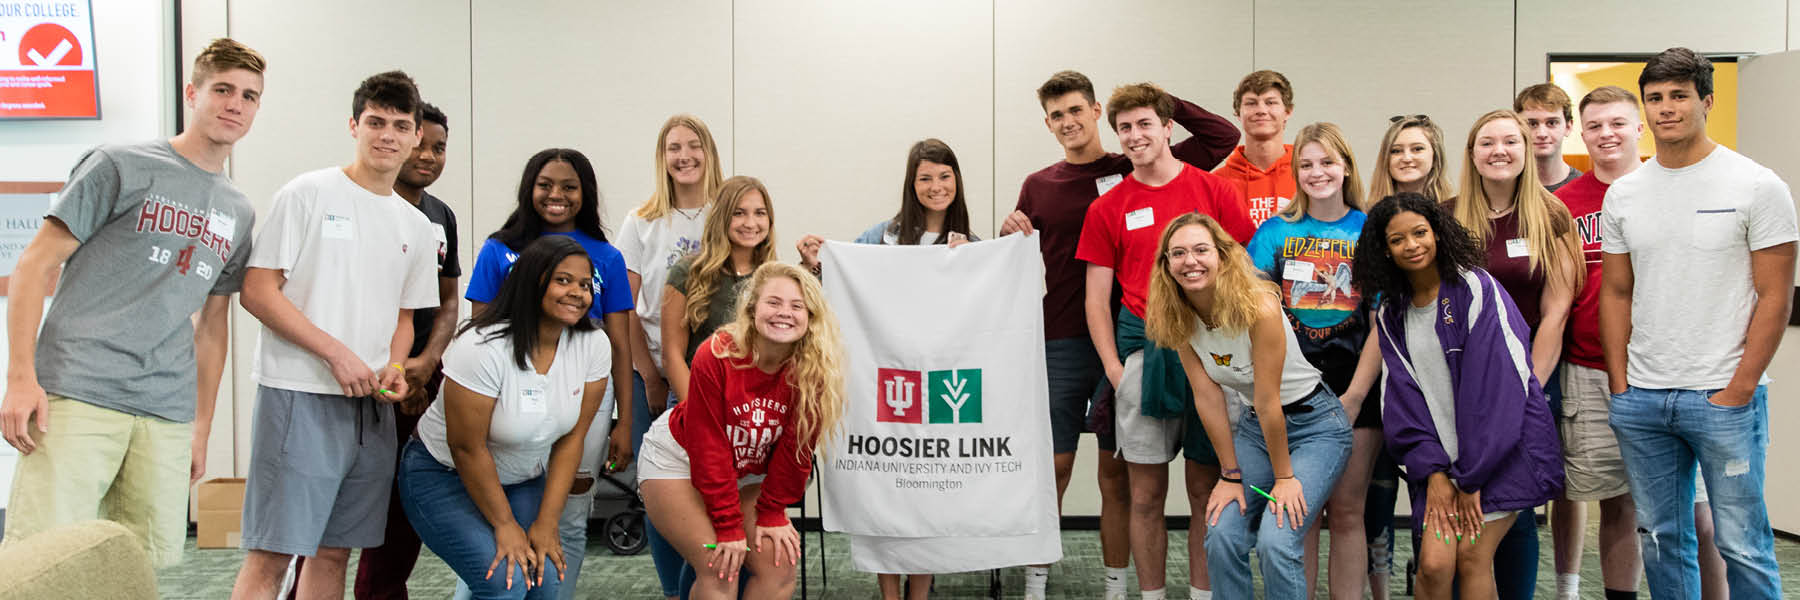 A group of students holding a Hoosier Link banner.